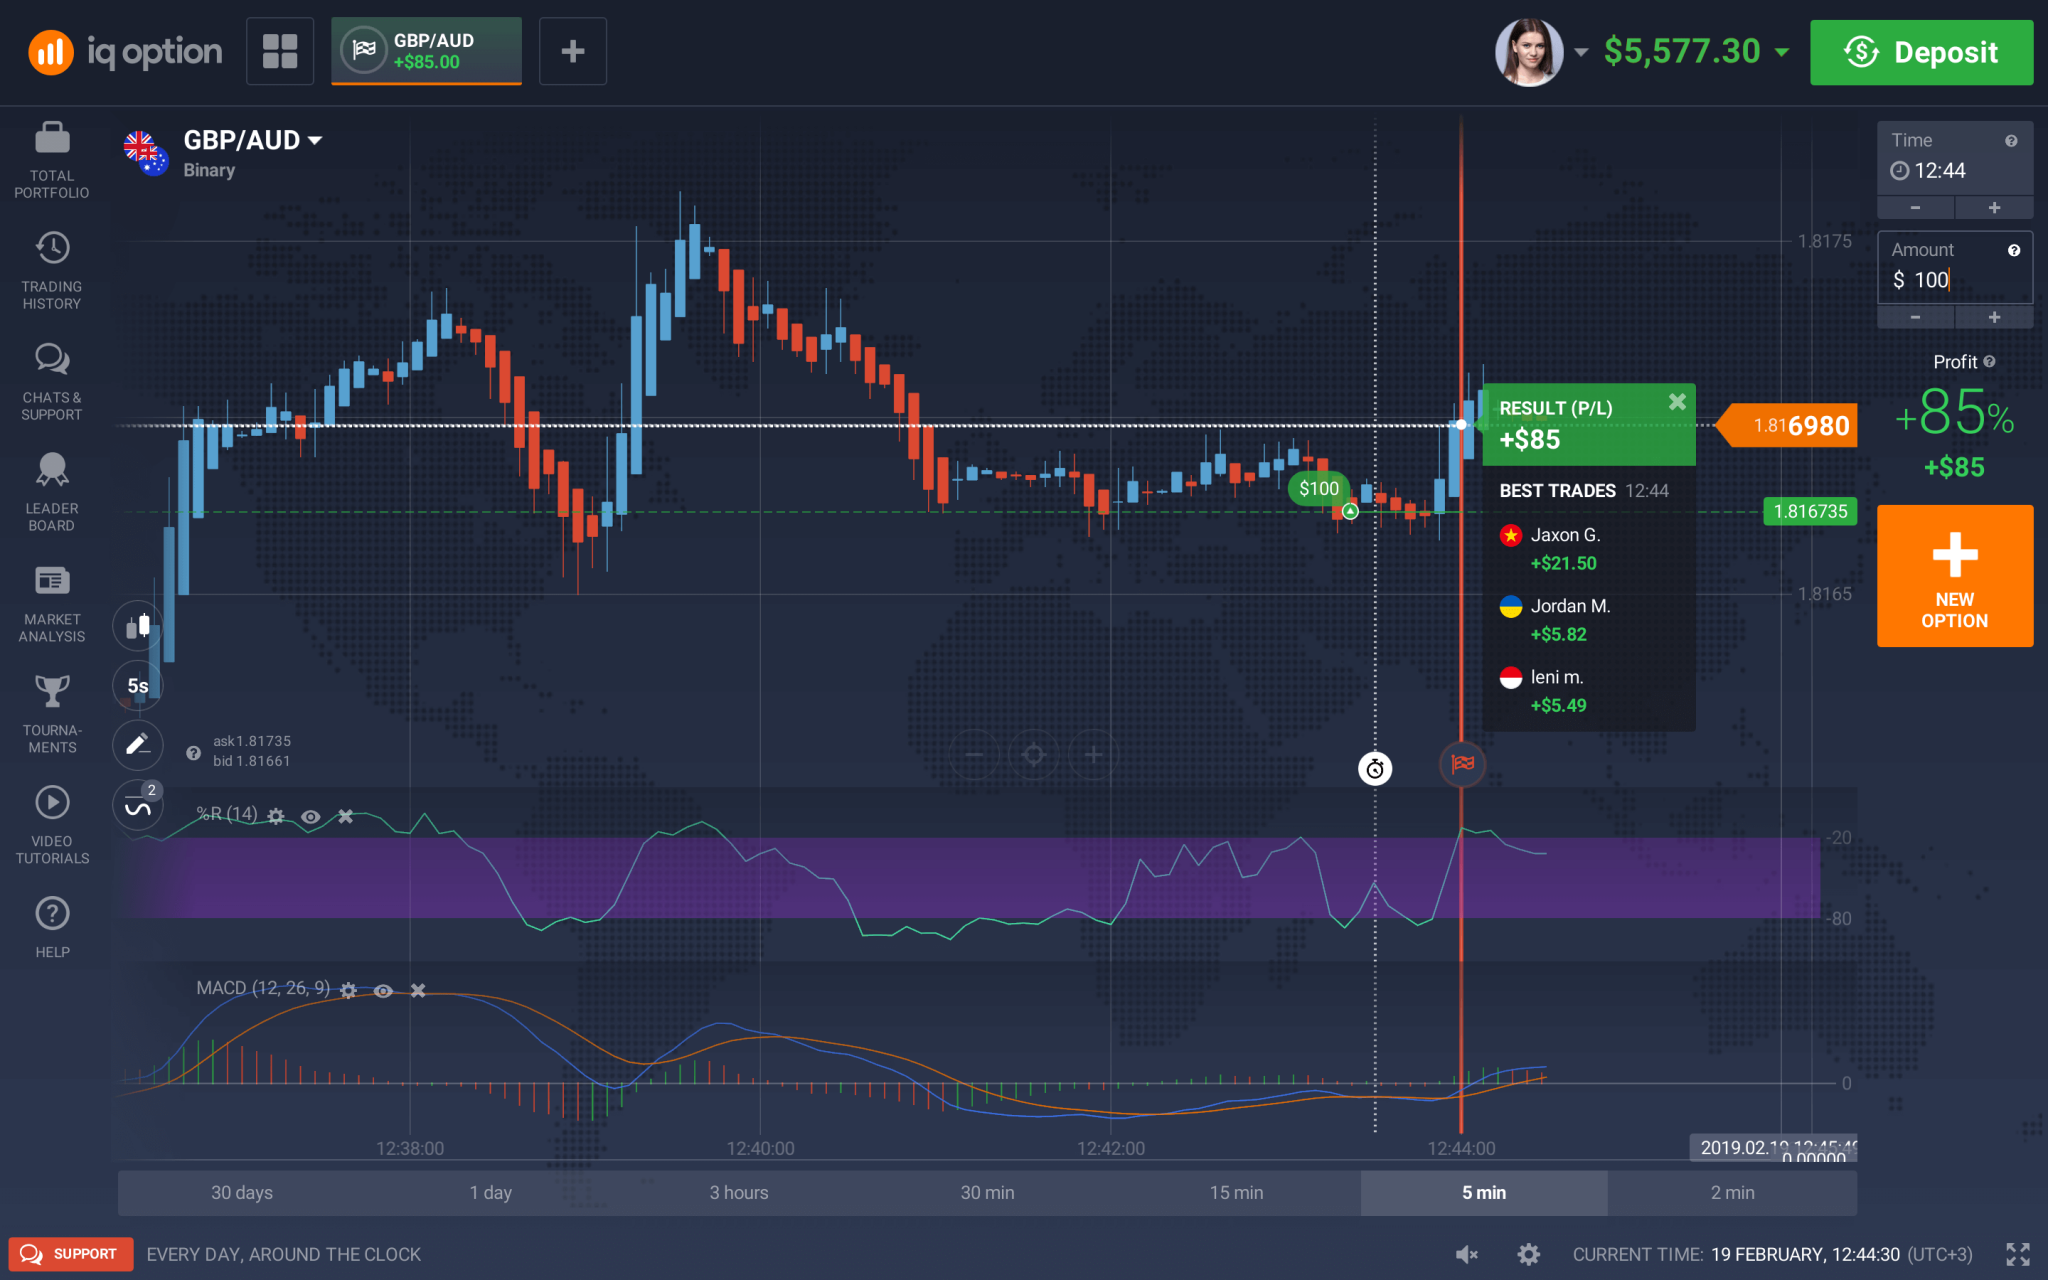 IQ Option Bitcoin Trading Broker Review - Read Before You ...